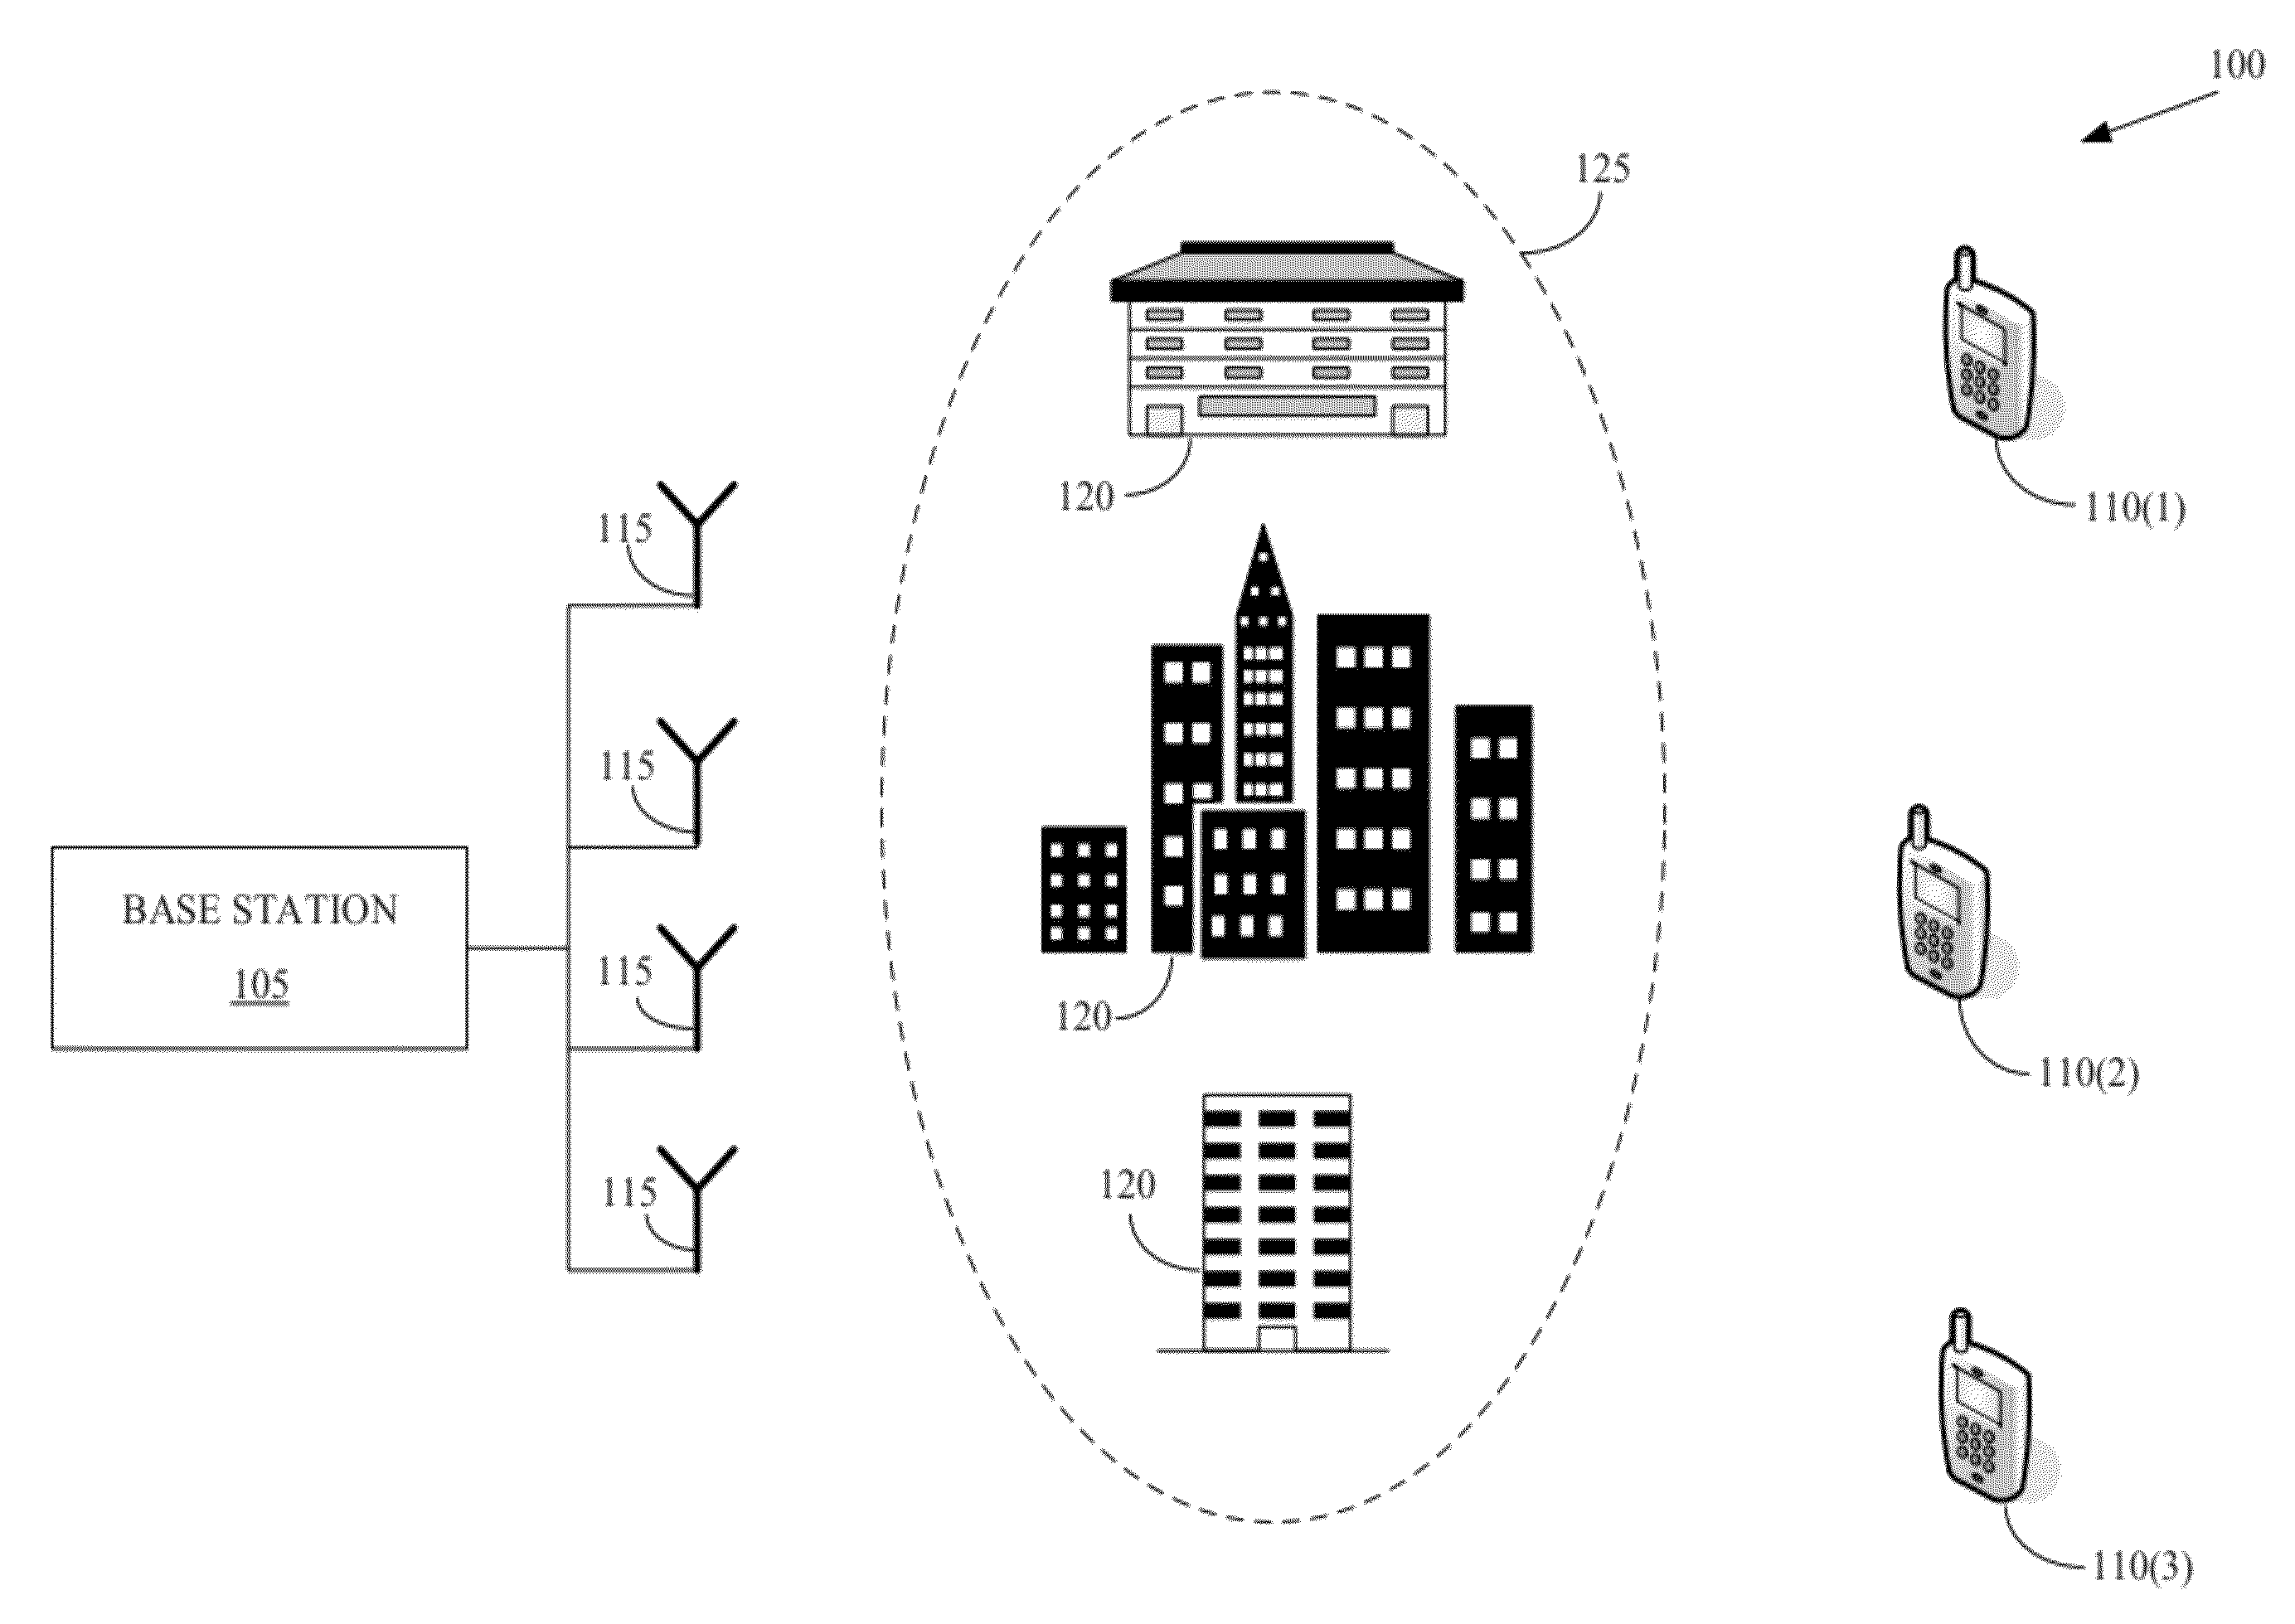 Method of transforming pre-coded signals for multiple-in-multiple-out wireless communication